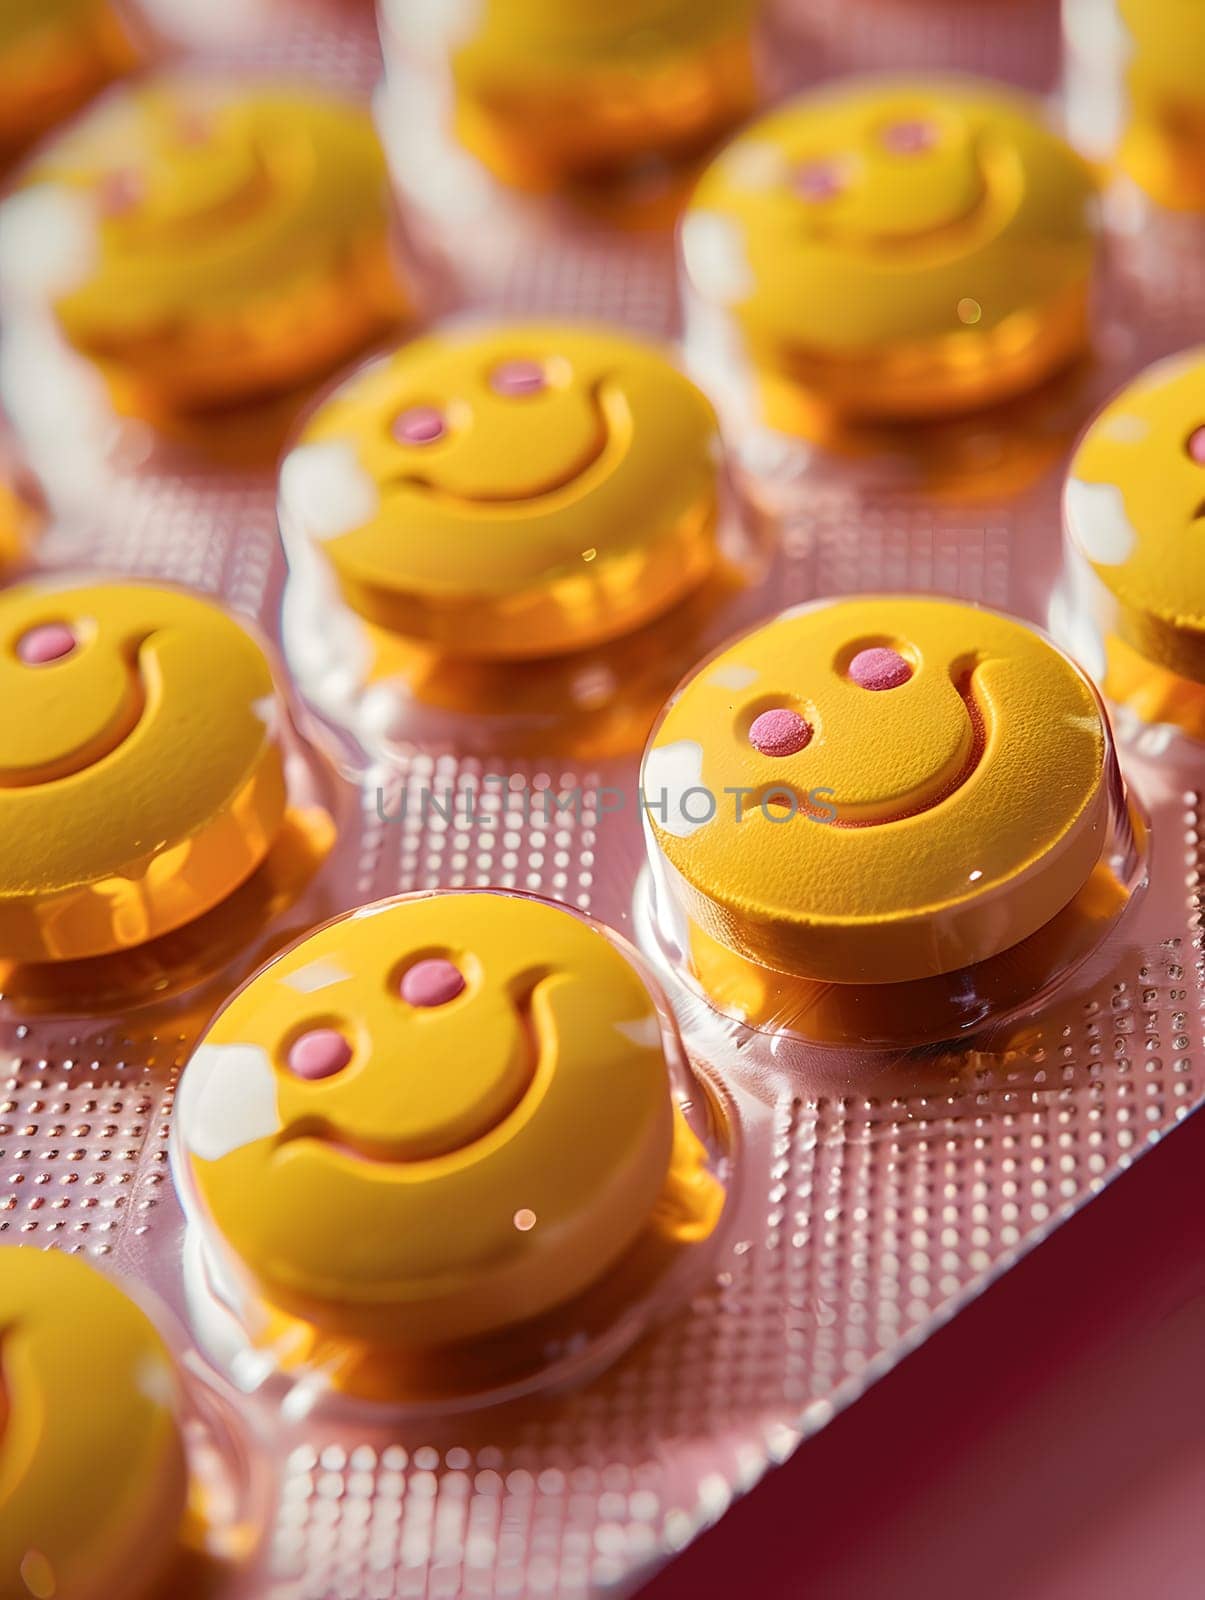 Toy blister pack of yellow smiley face pills for sweet expressions by Nadtochiy